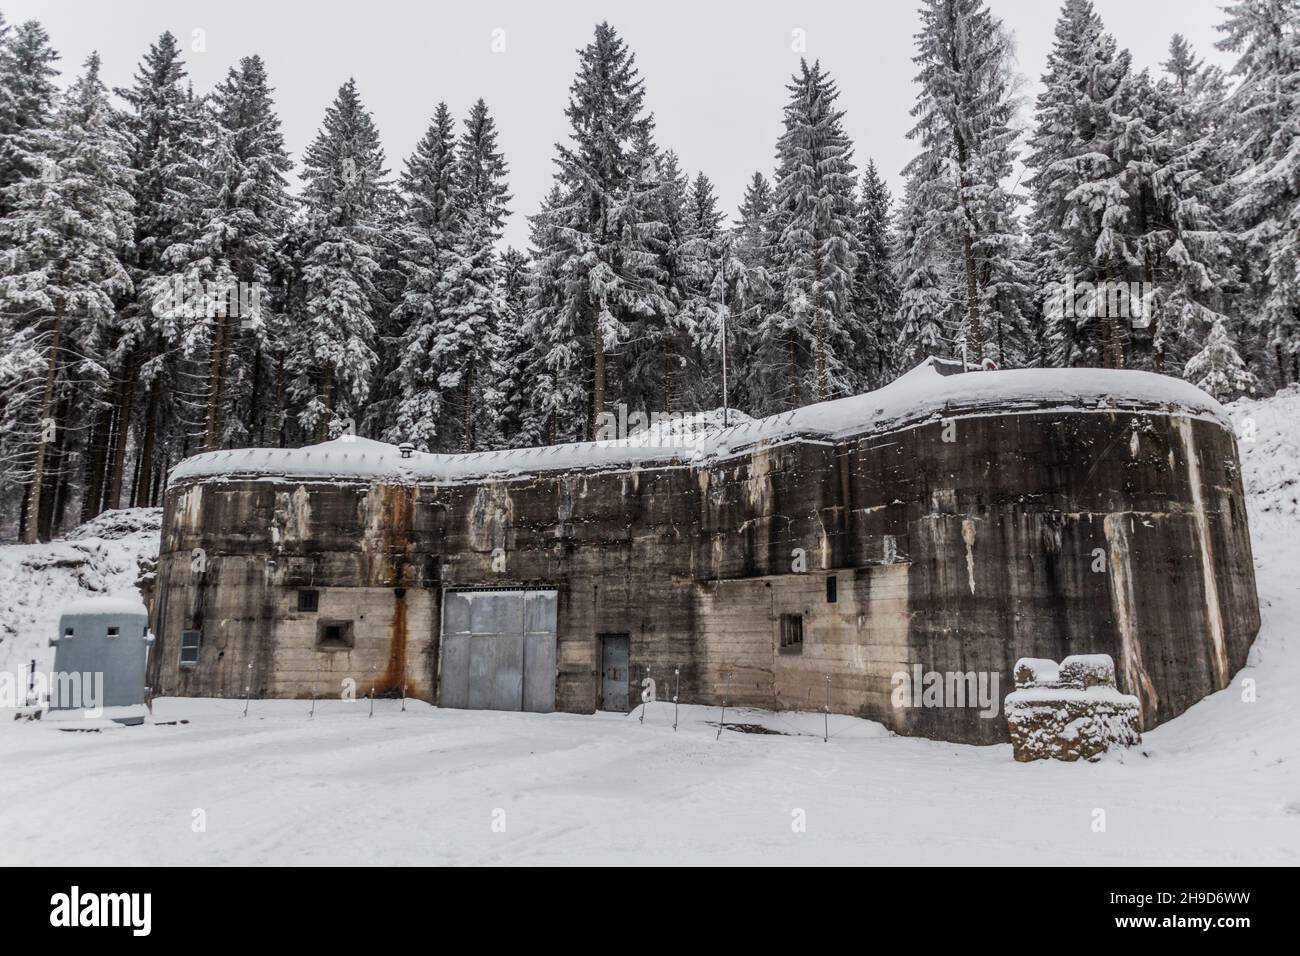 Winter view of concrete stronghold, part of Bouda fortress, Czech Republic Stock Photo